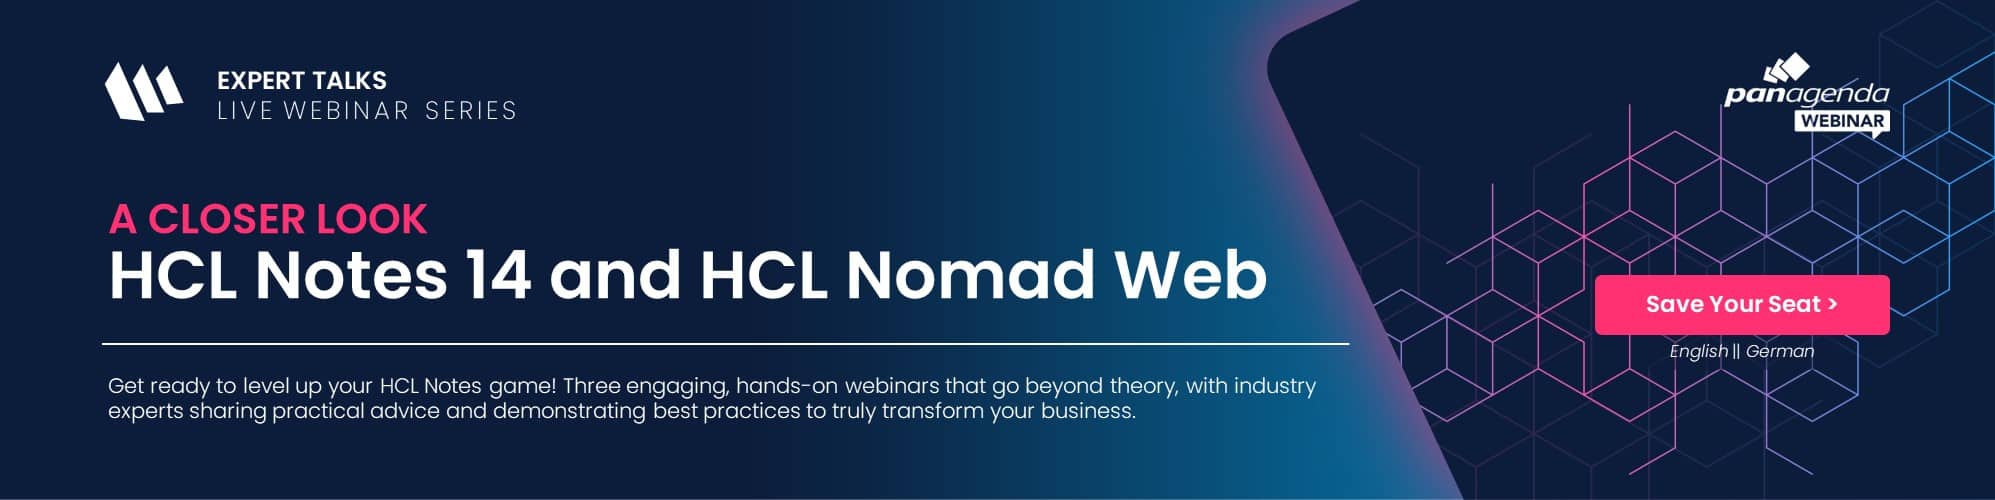 webinar-series-banner-web-A-Closer-Look: HCL-Notes-14-e HCL-Nomad-Rede